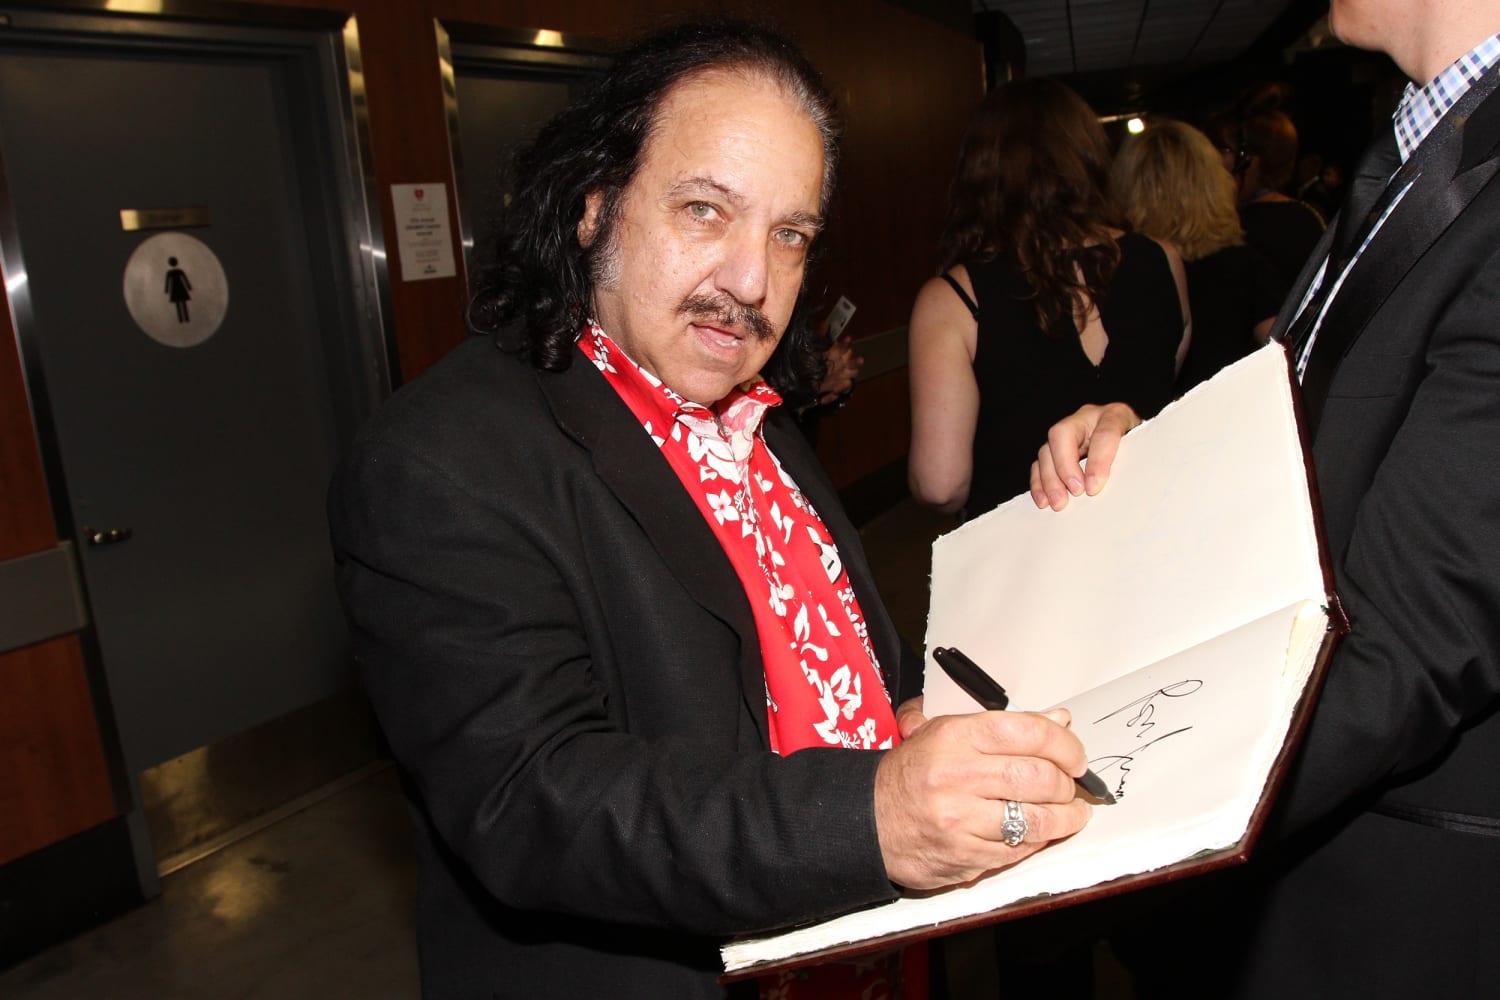 Reap Xxx Com - Porn actor Ron Jeremy charged with rape, sexual assault